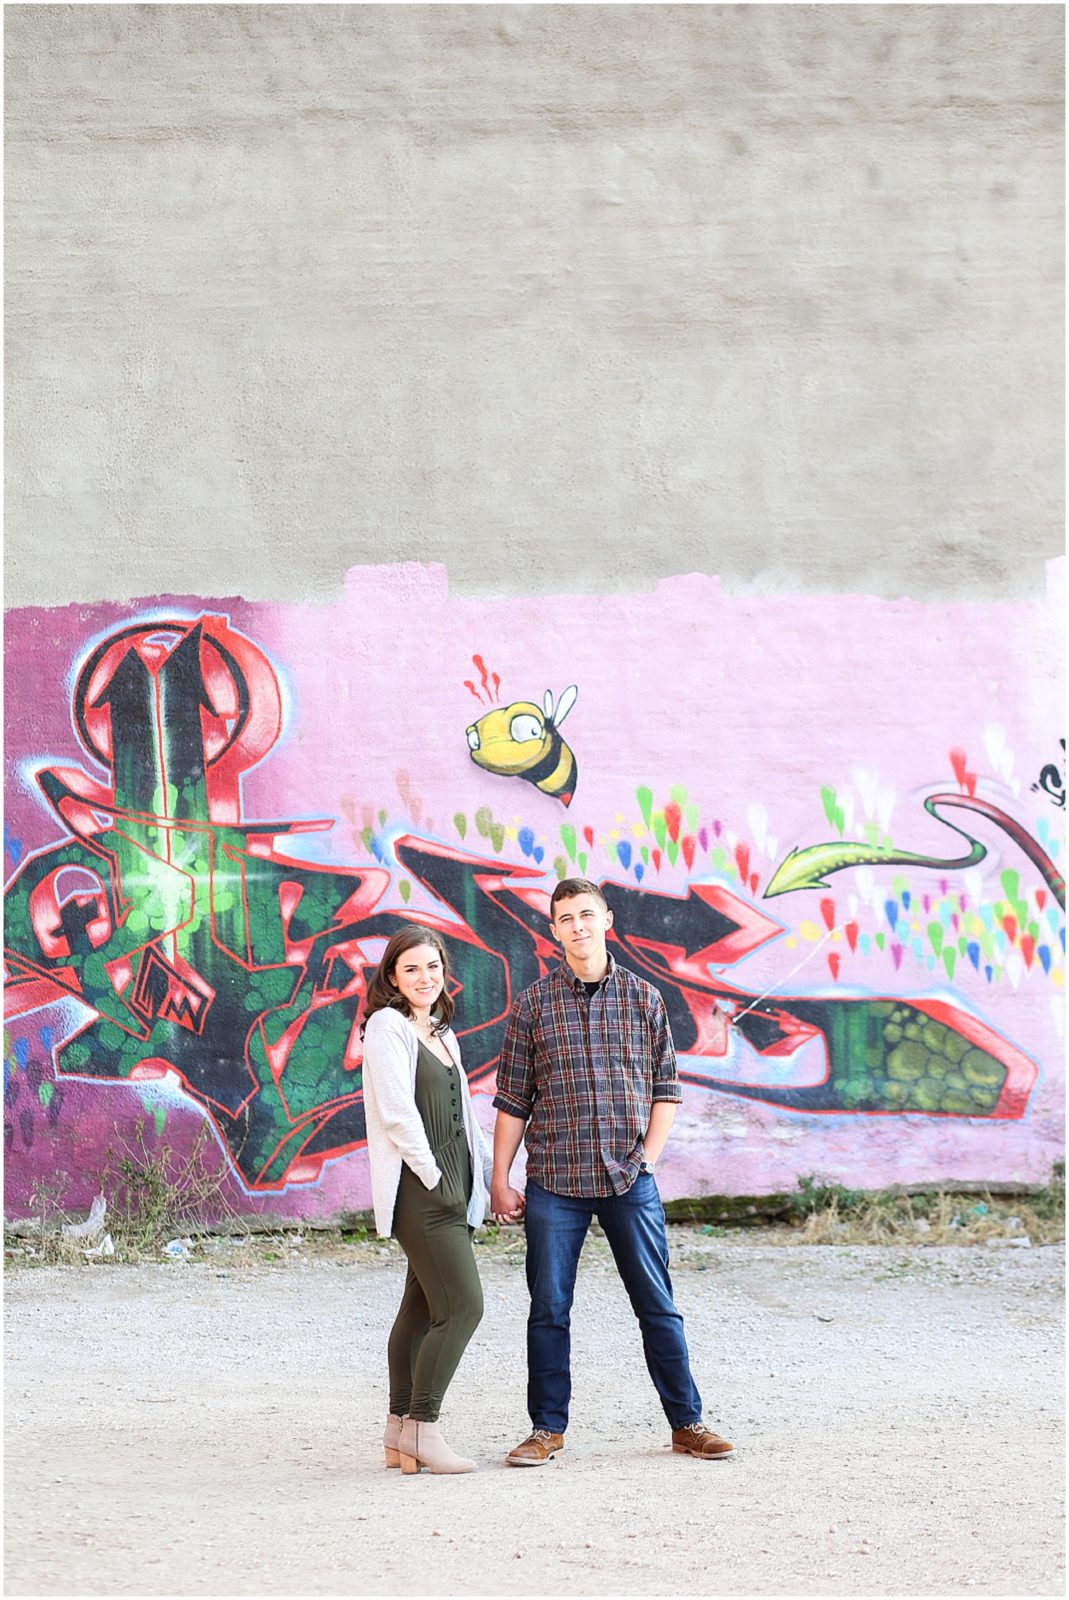 graffiti wall - the bride and the bauer - Avery and Jack Engagement Session - Kansas City West Bottoms Engagement Portraits - KC Wedding Photographer - Olathe Lenexa Leawood Kansas Wedding Photography and Video  - Mariam Saifan Photography 